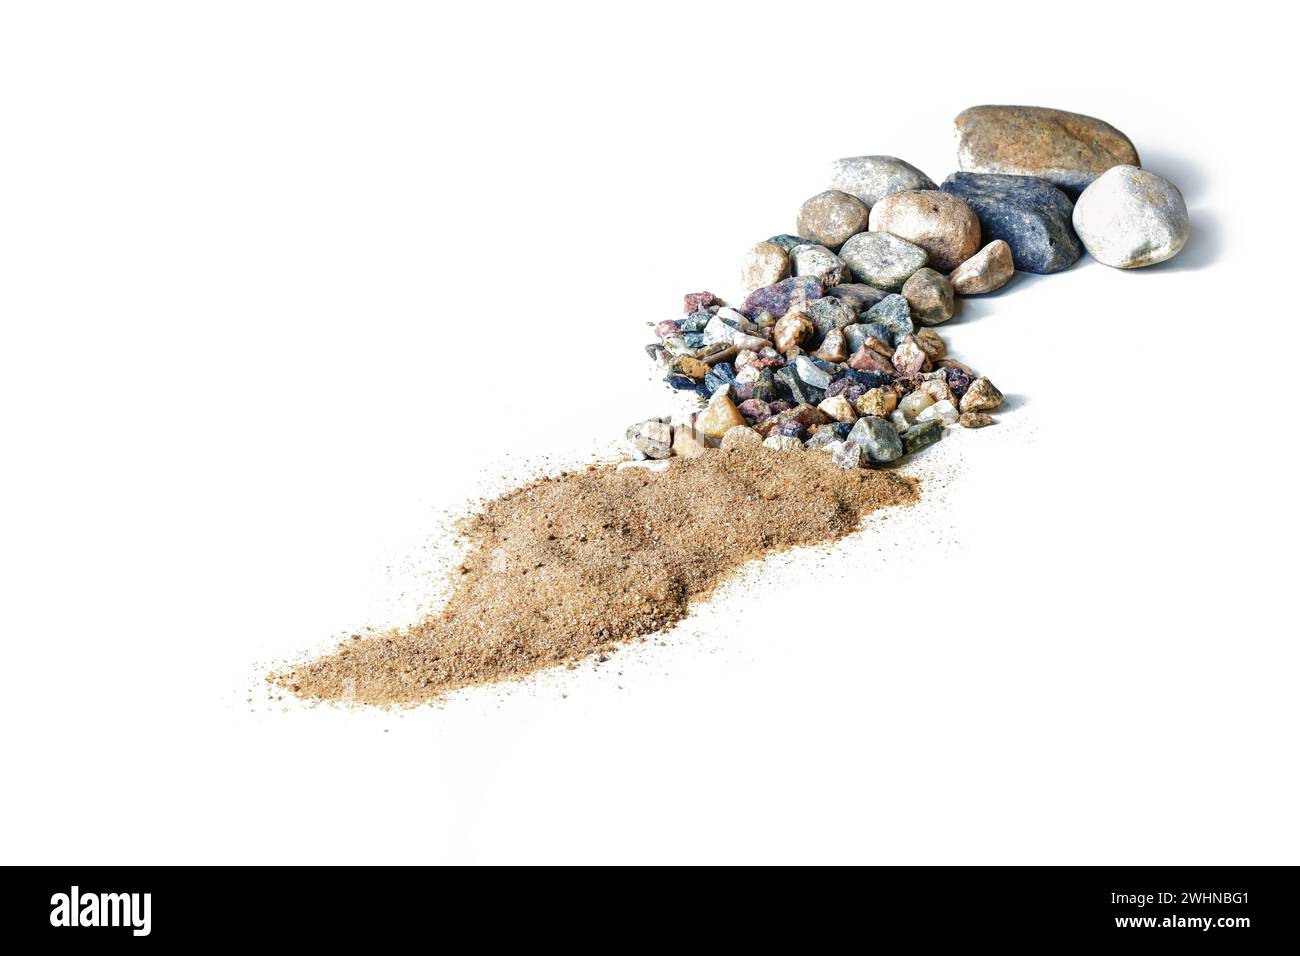 Life path metaphor with stones, pebbles, gravel and sand on a white background, symbol for a universal resume to represent the j Stock Photo